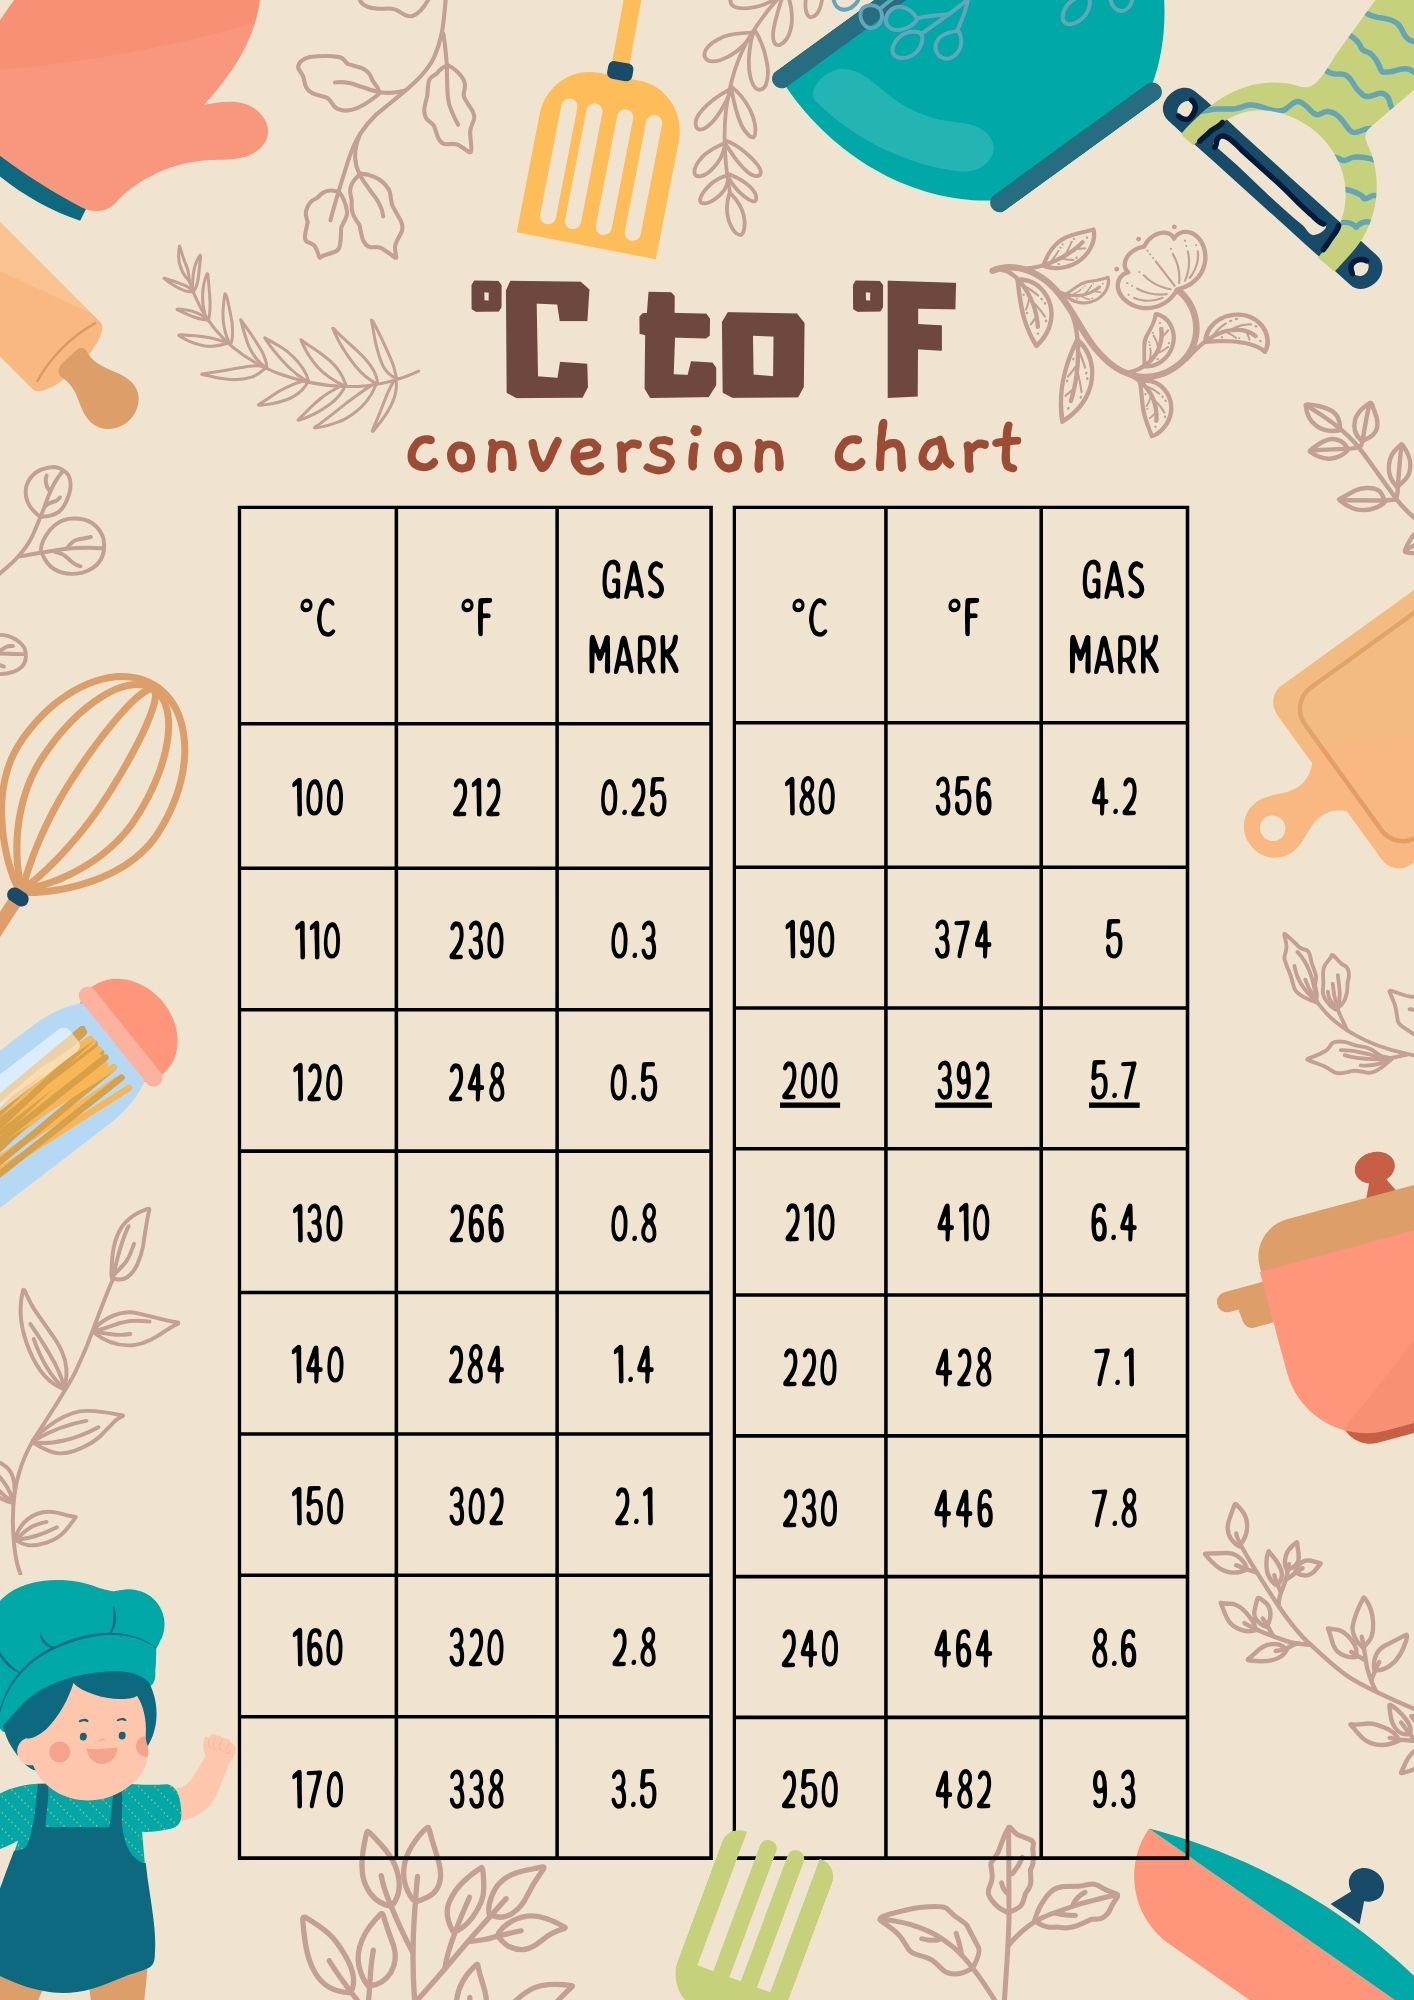 200 c to f conversion chart